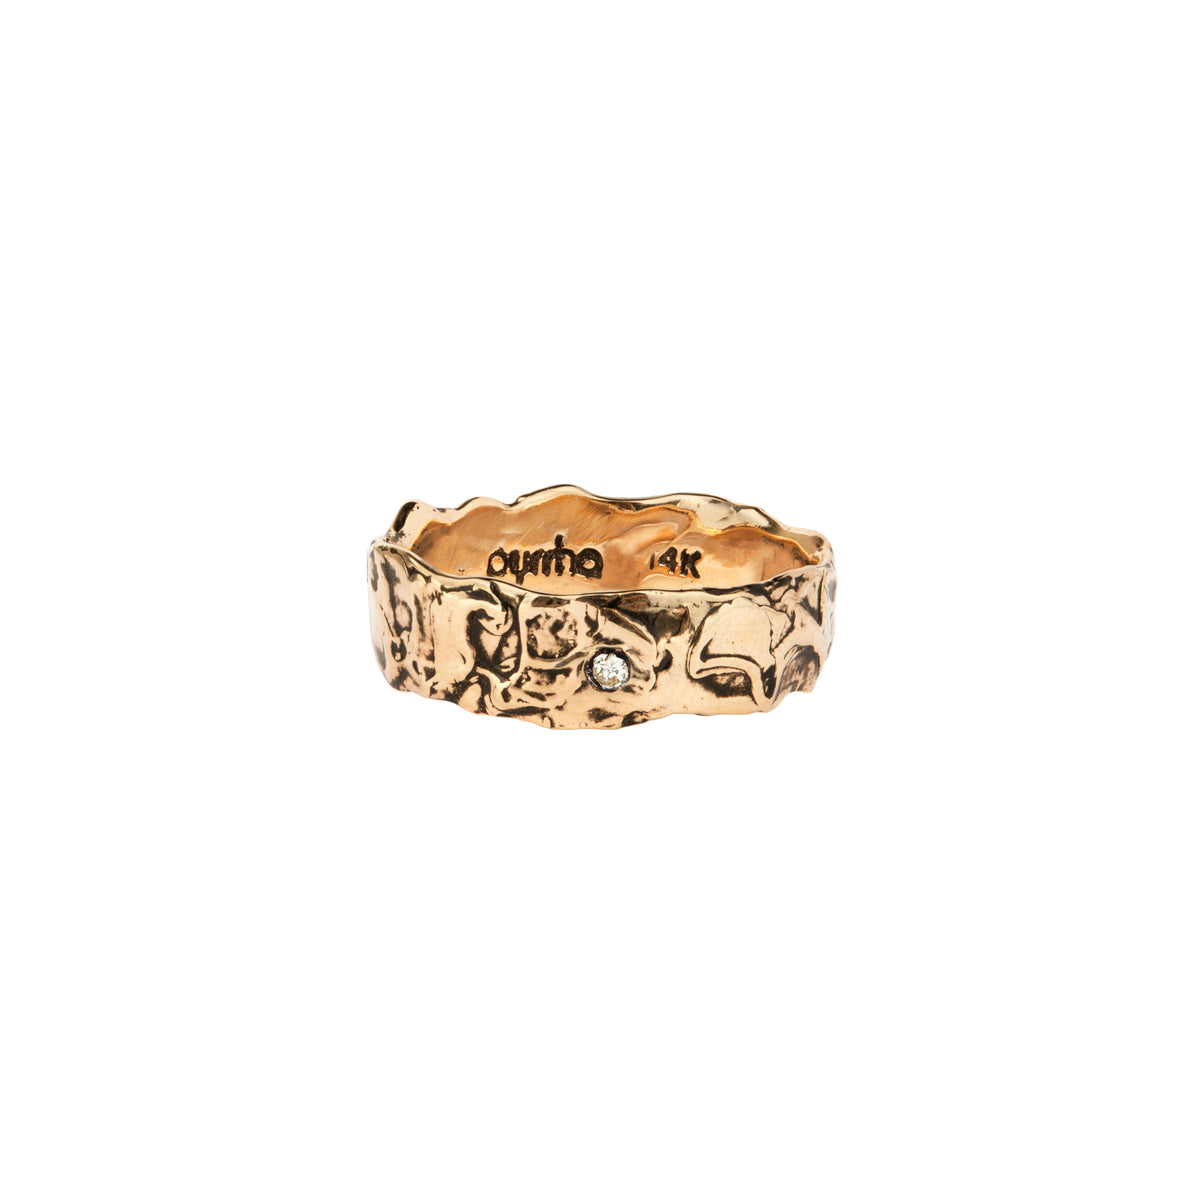 Stone Set 14K Gold Wide Textured Band Ring